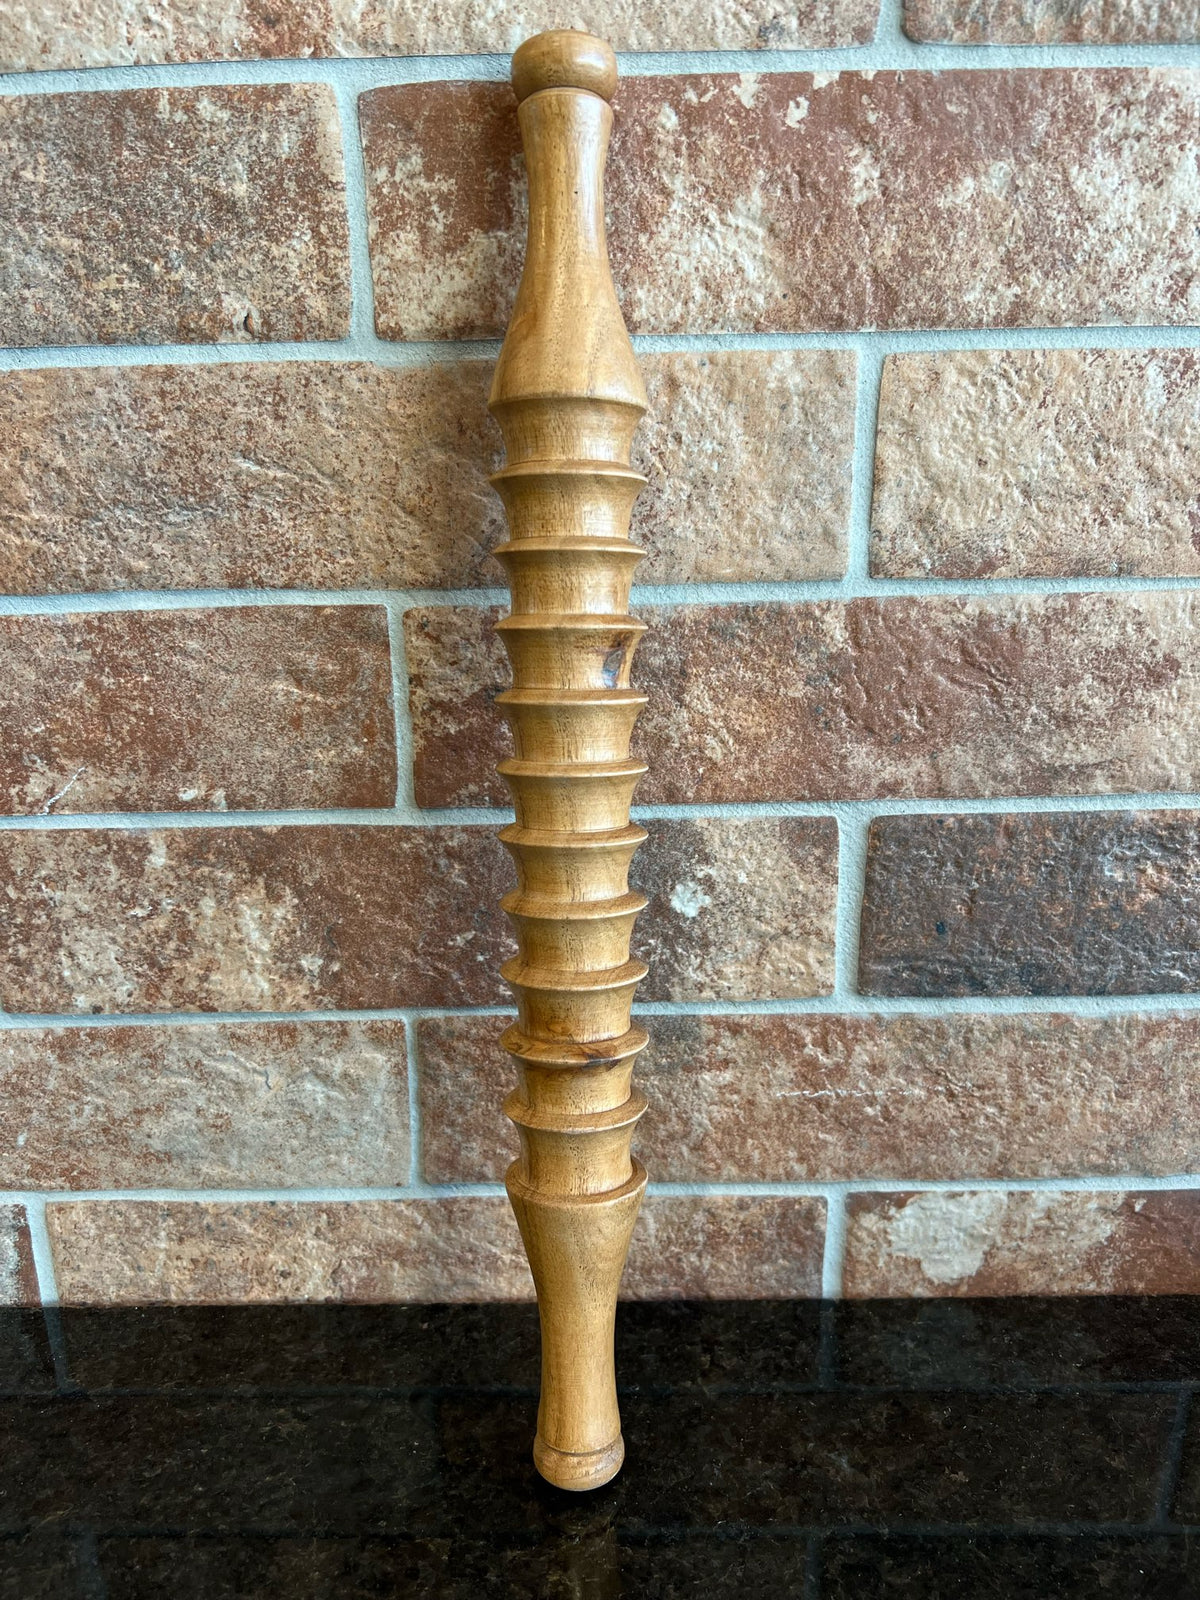 Hand-Carved Wood Rolling Pin